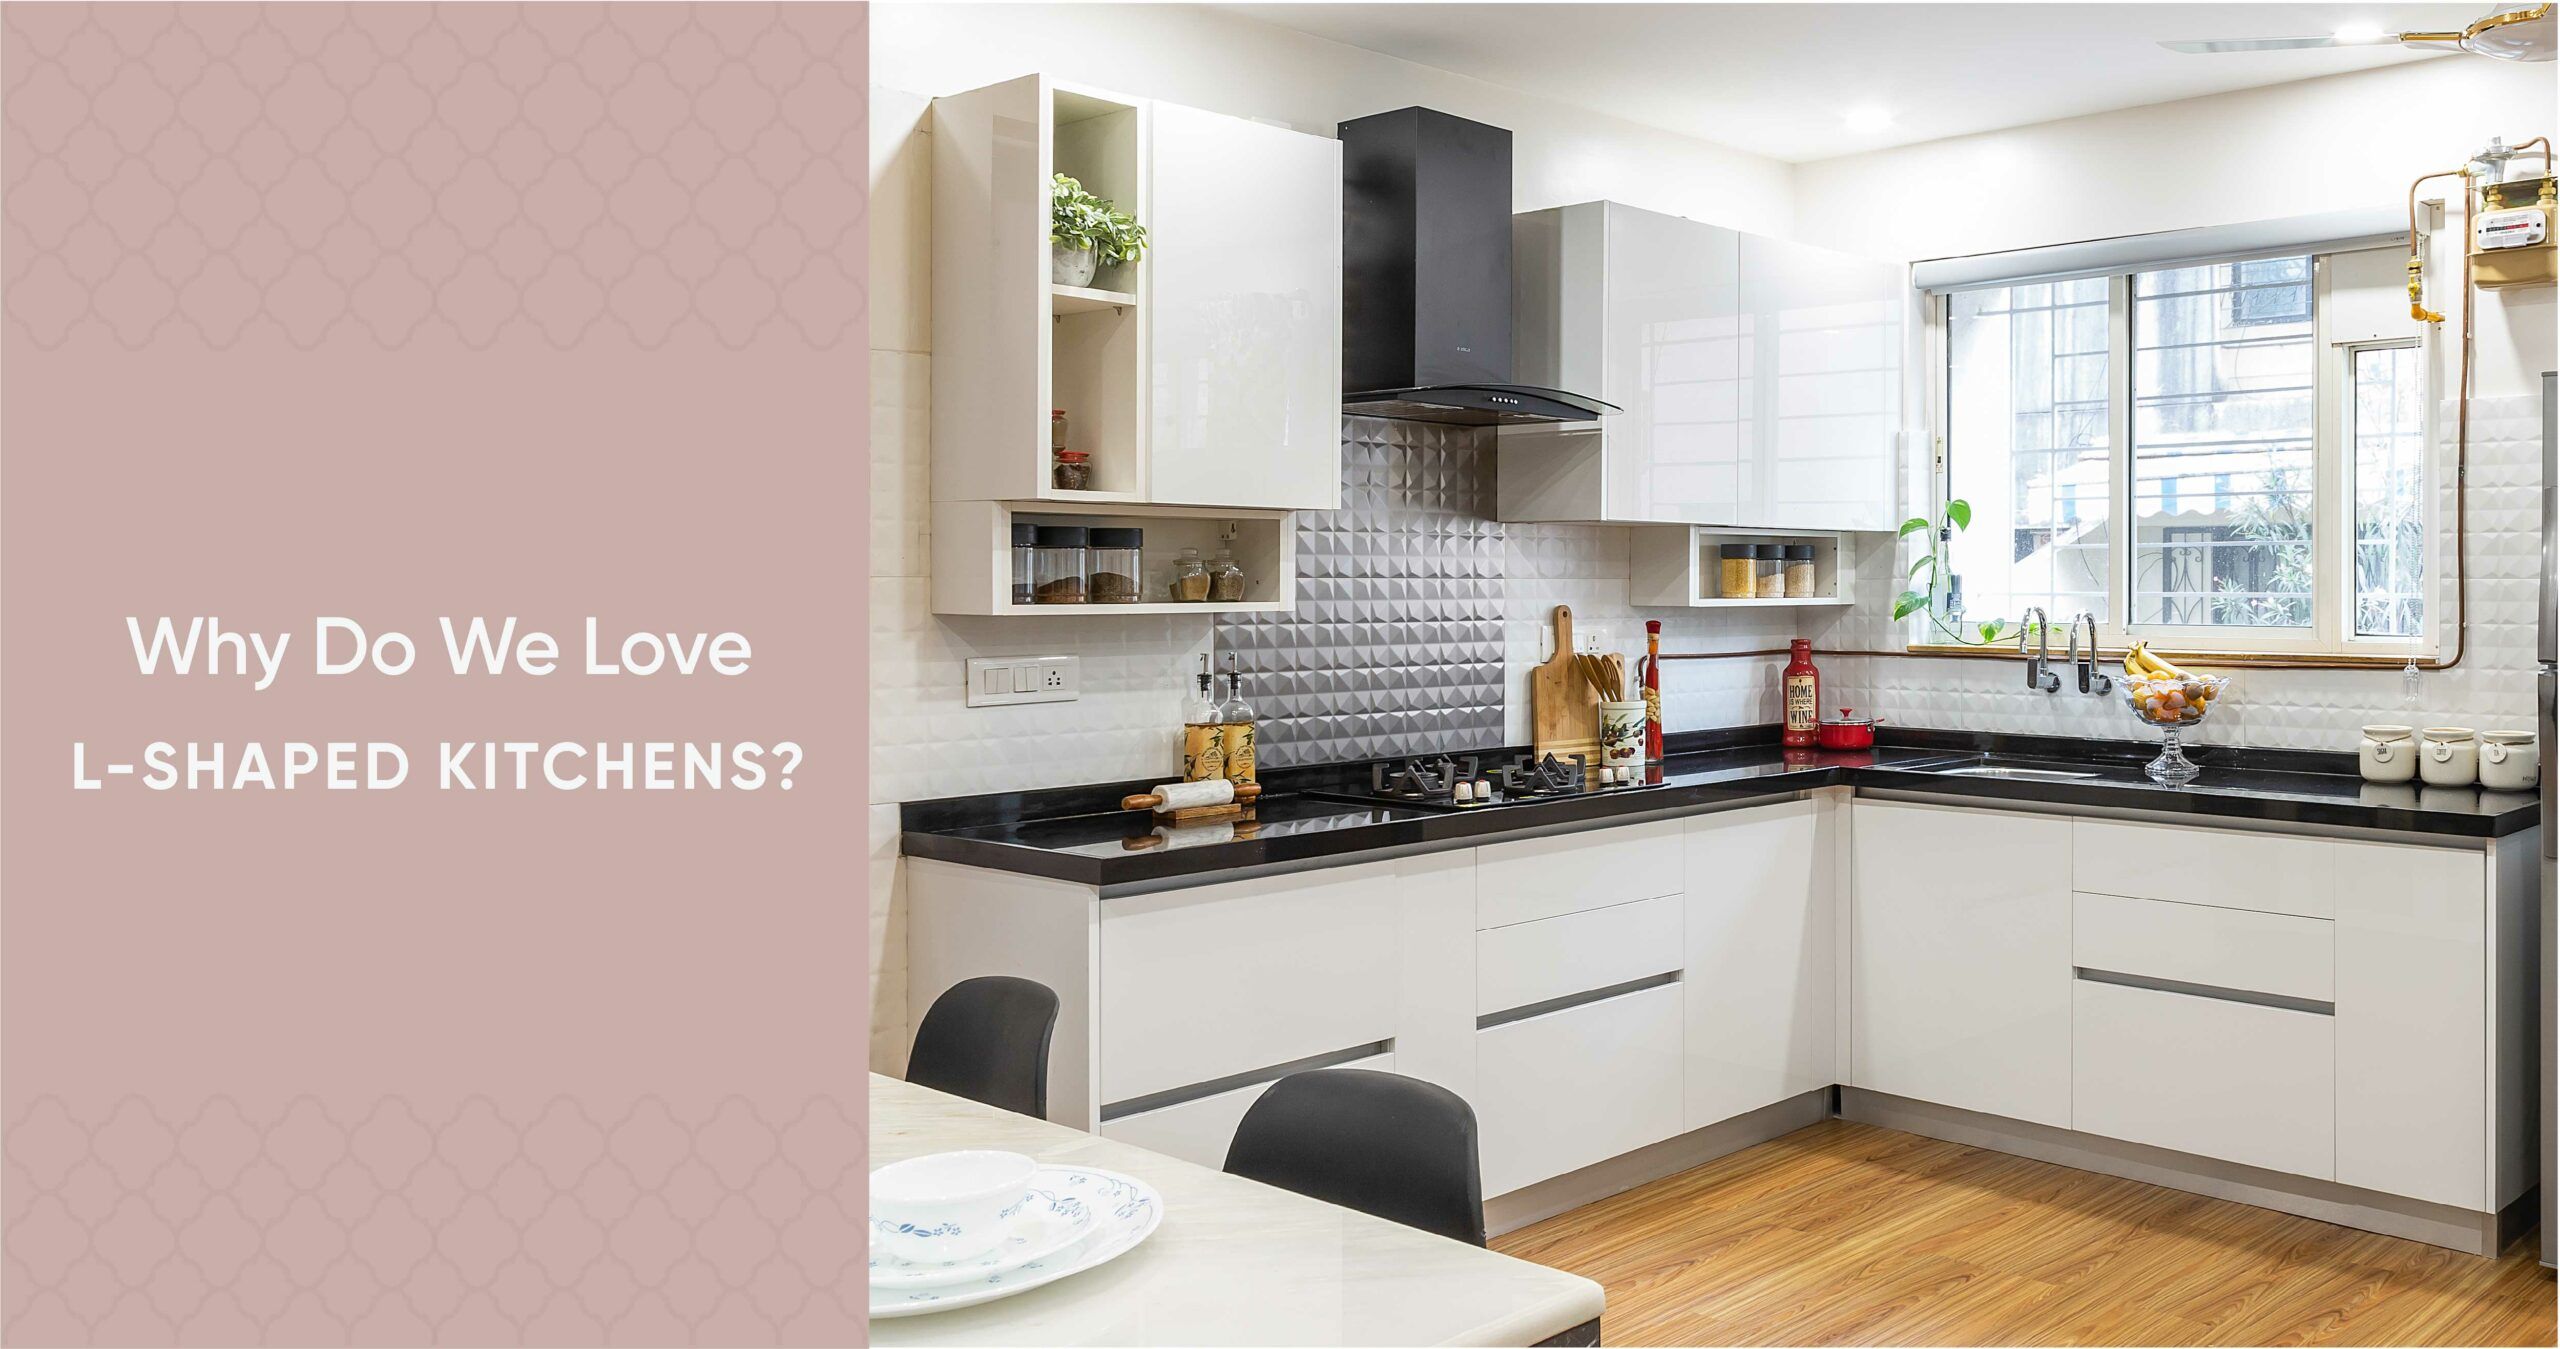 Small Indian Kitchen Design in L Shape and Why We Love Them